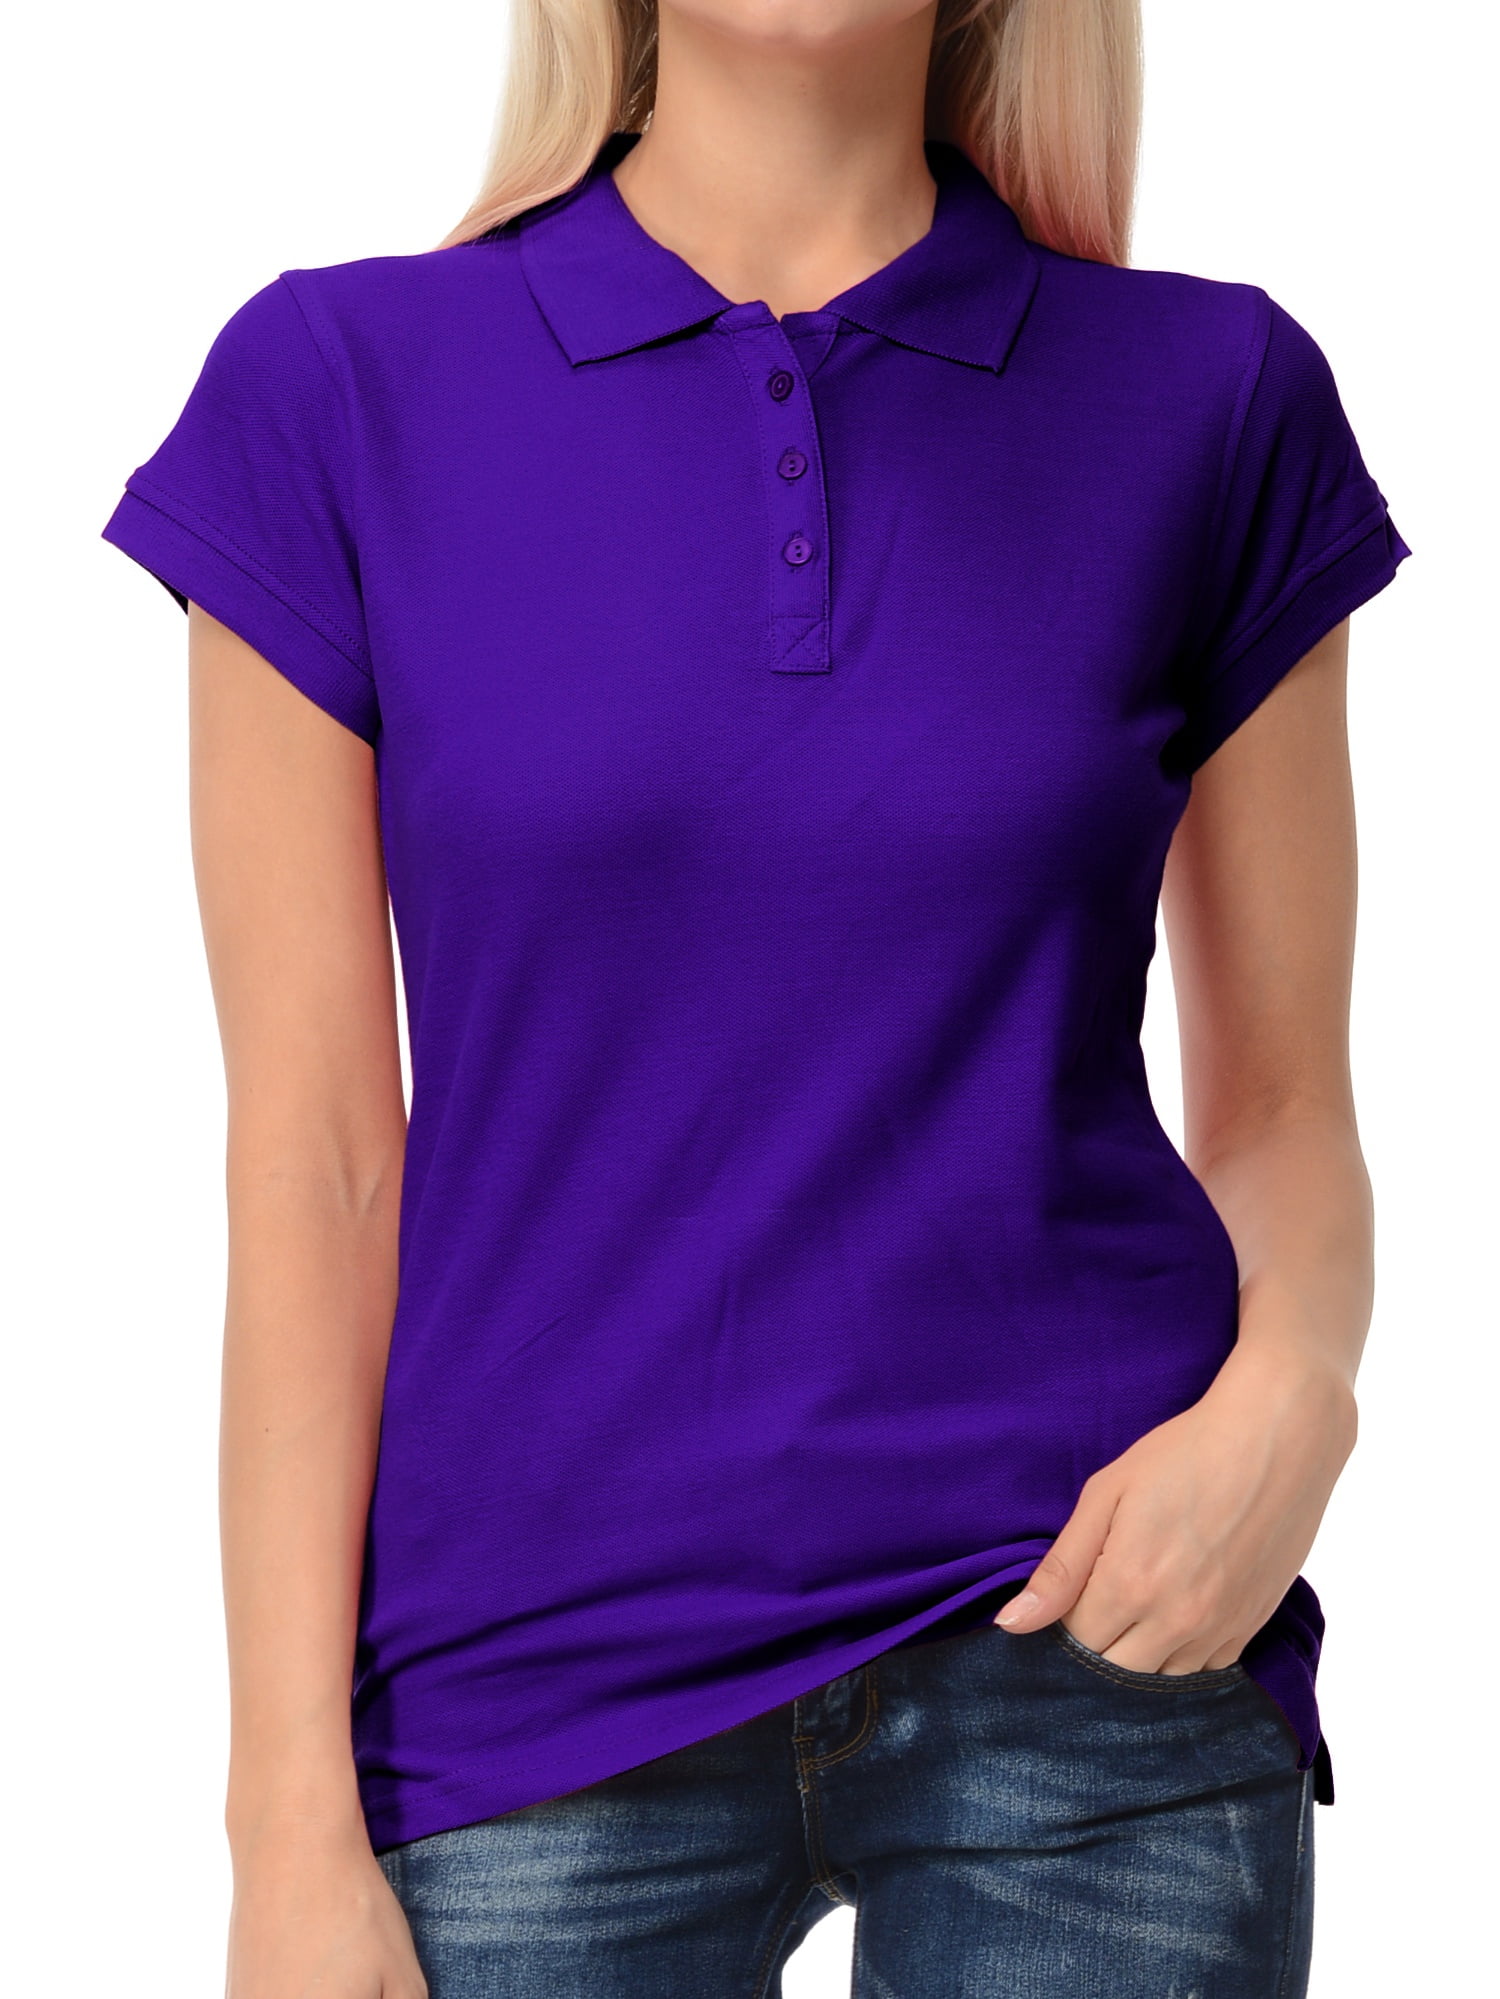 Basico Purple Polo Collared Shirts For Women 100% Cotton Short Sleeve ...